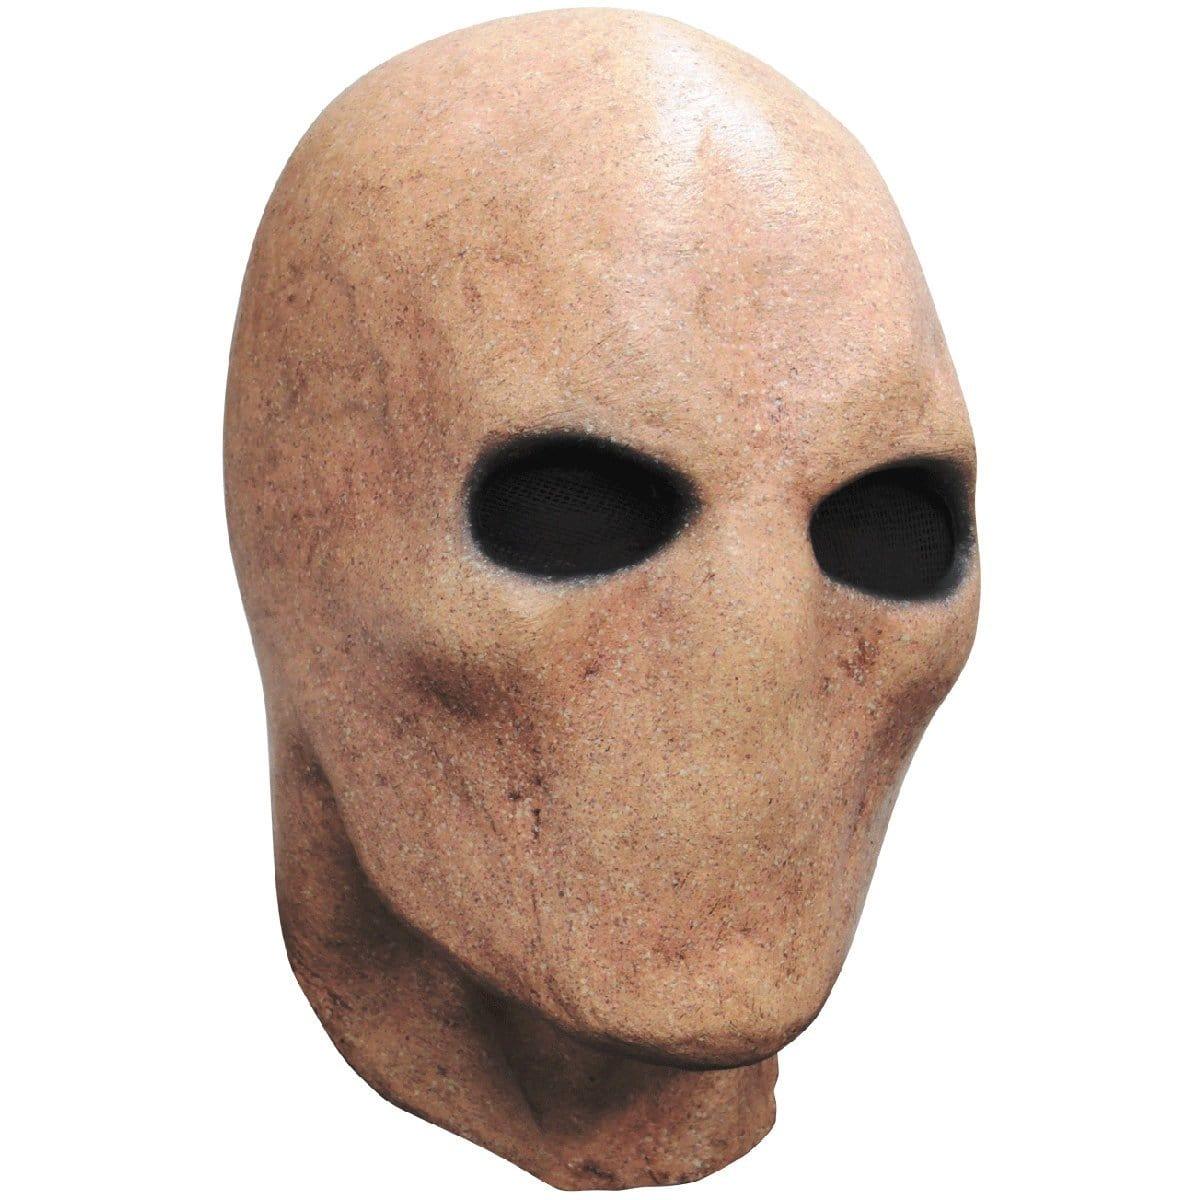 Buy Costume Accessories Slenderman mask sold at Party Expert